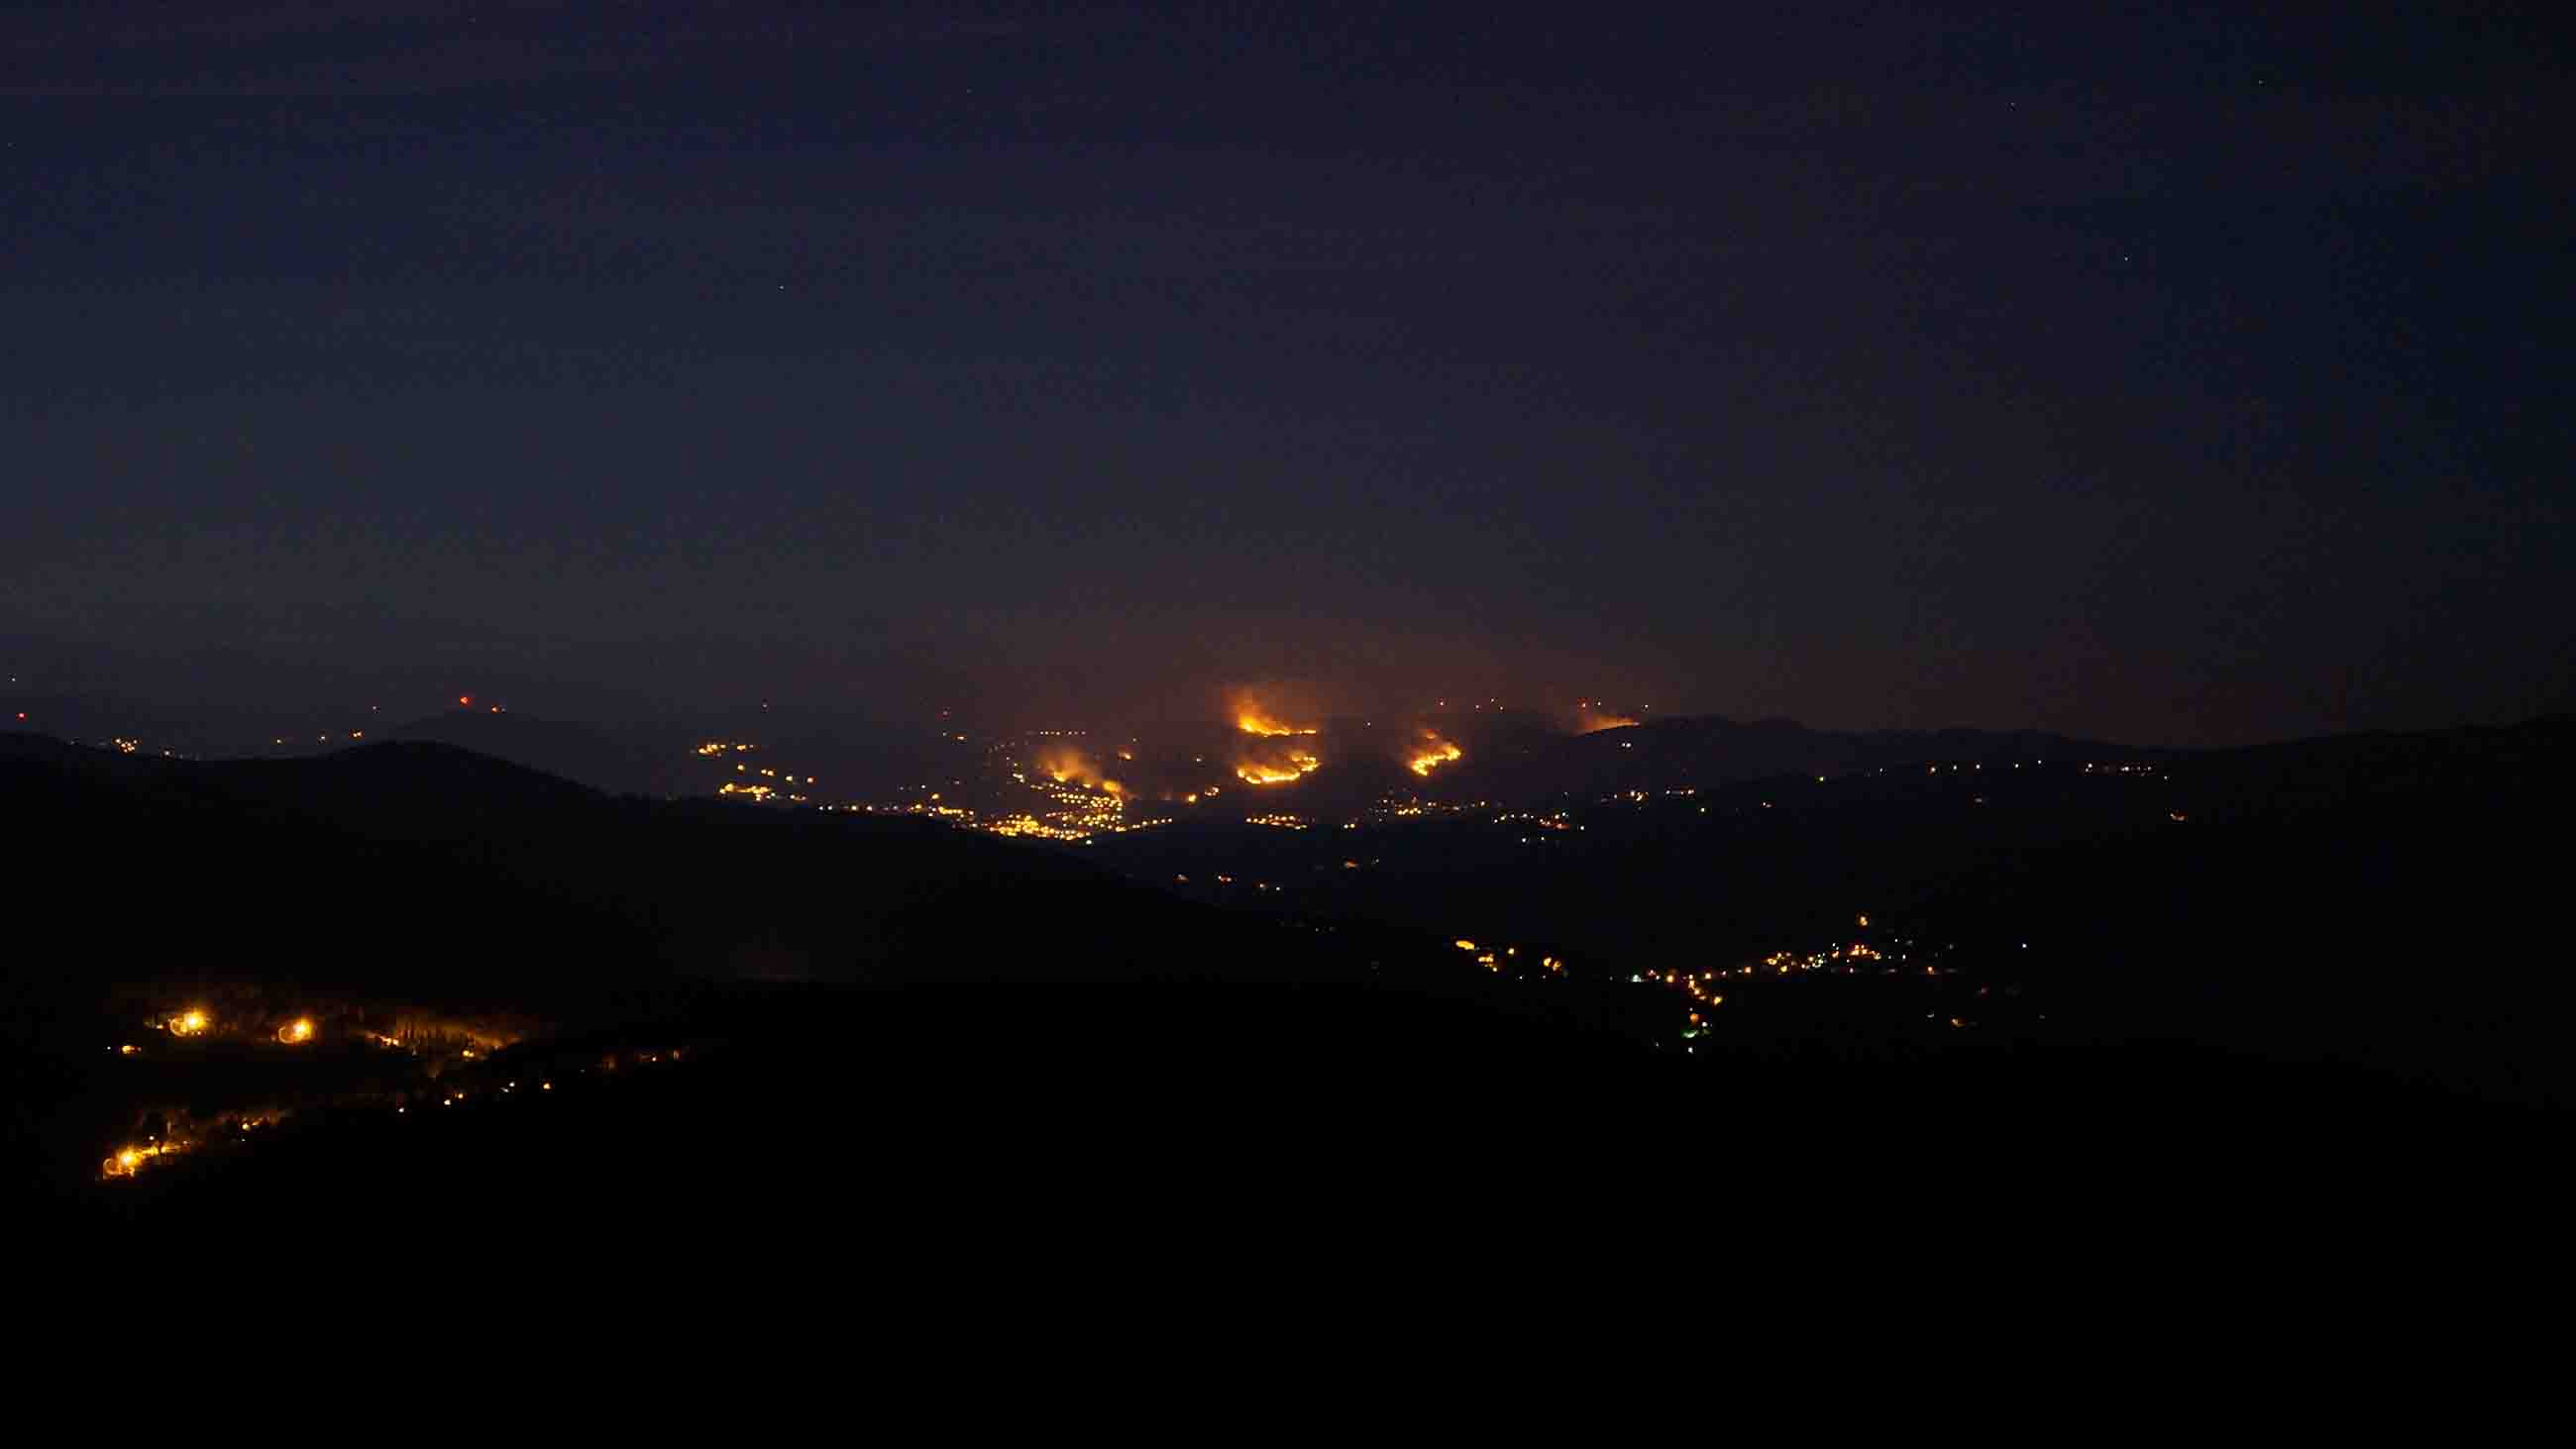 In Portugal, 268 wildfires broke out on Saturday alone.